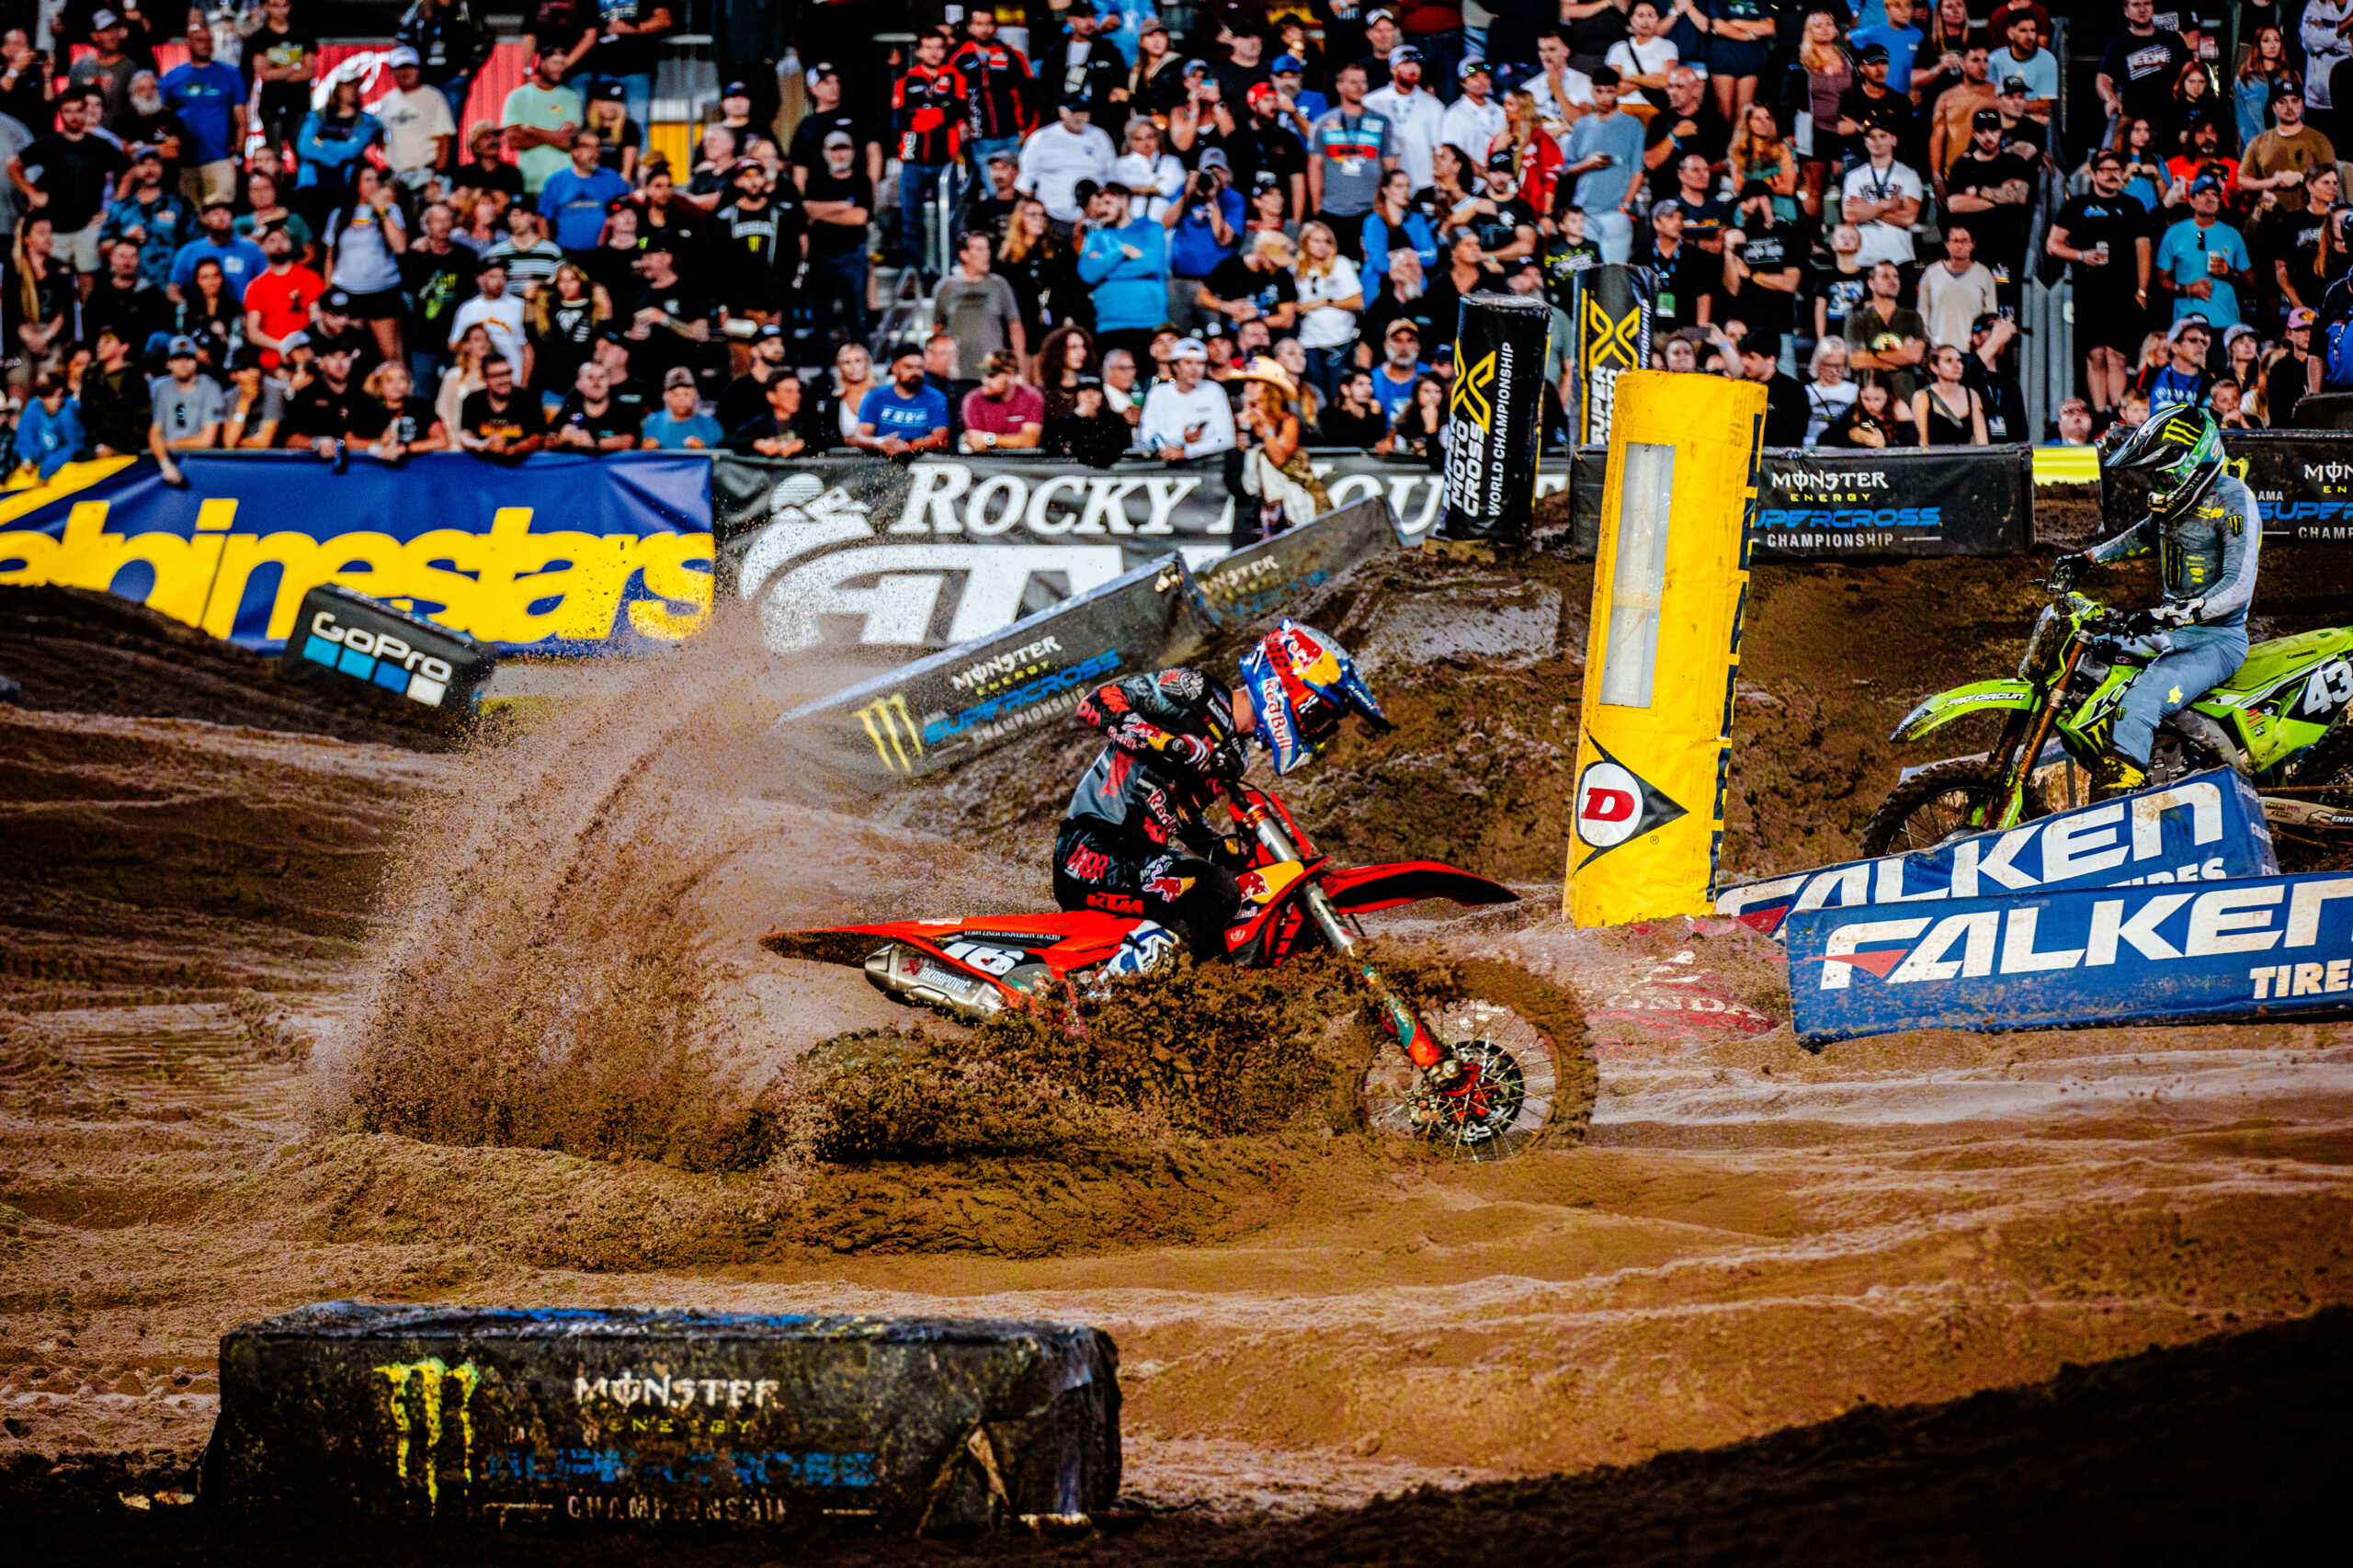 Tom vialle navigates "the beach" during the 2024 daytona supercross race en route to his first career victory.